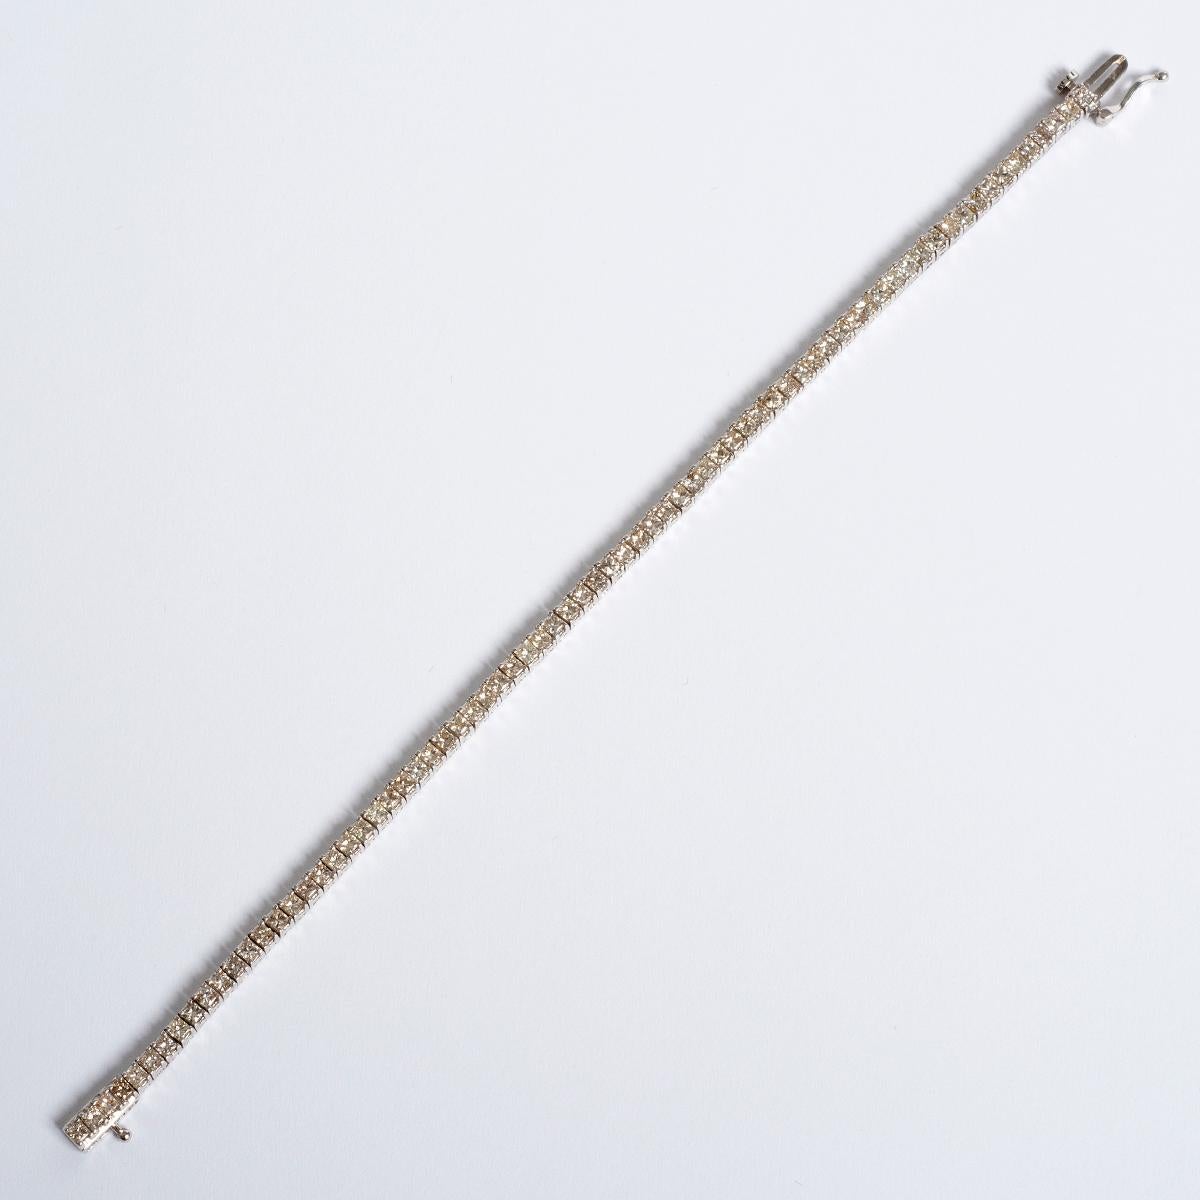 A unique piece within our carefully curated Vintage & Prestige fine jewellery collection, we are delighted to present the following: This classic 9K white gold diamond tennis bracelet measures 170mm, with 5.06ct in diamonds, a classical piece.